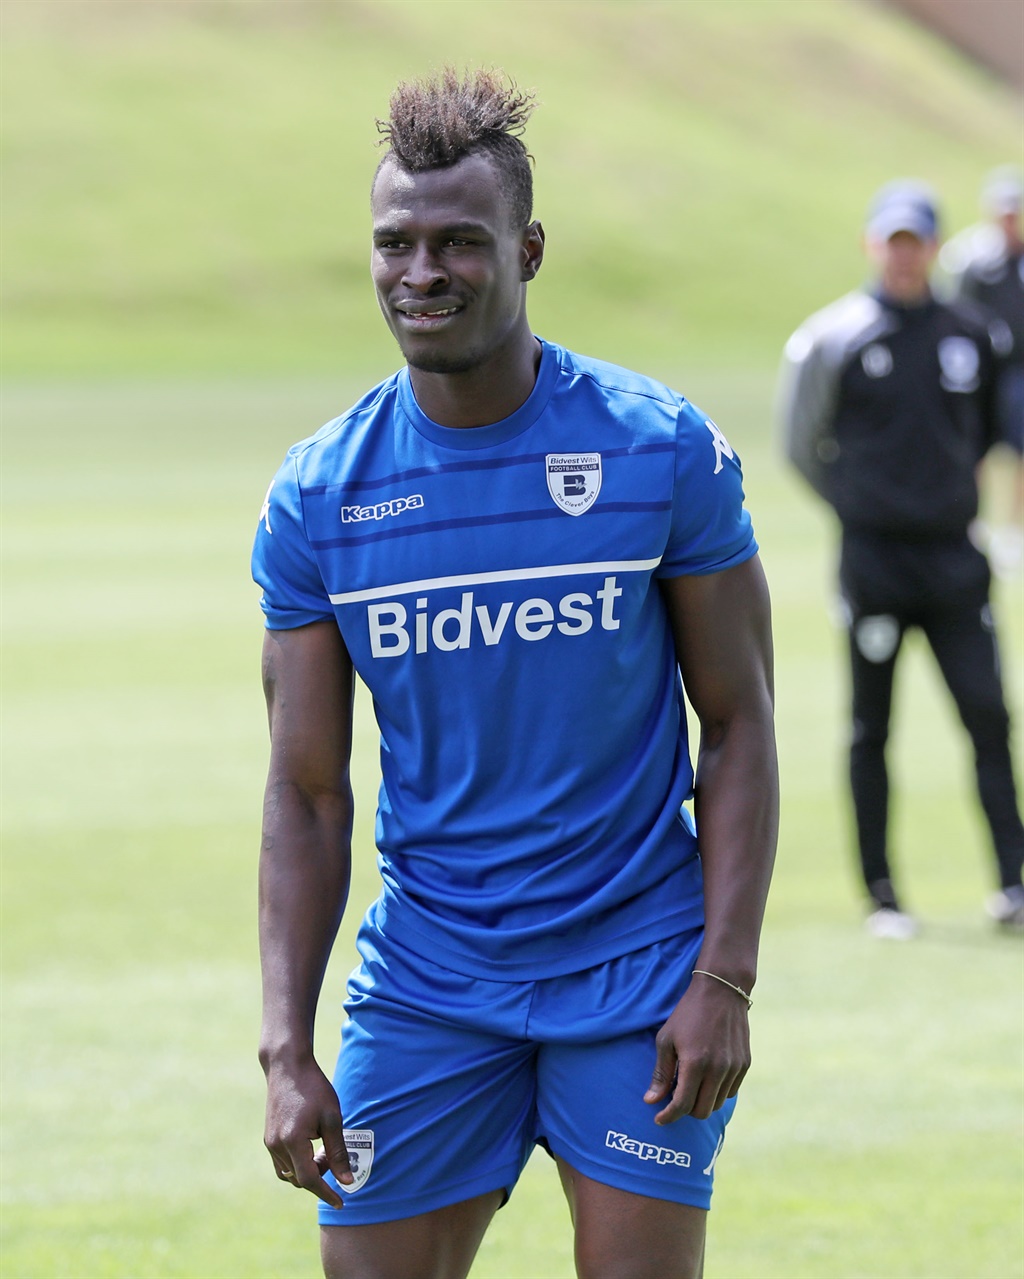 Bidvest Wits have signed Edwin Gyimah